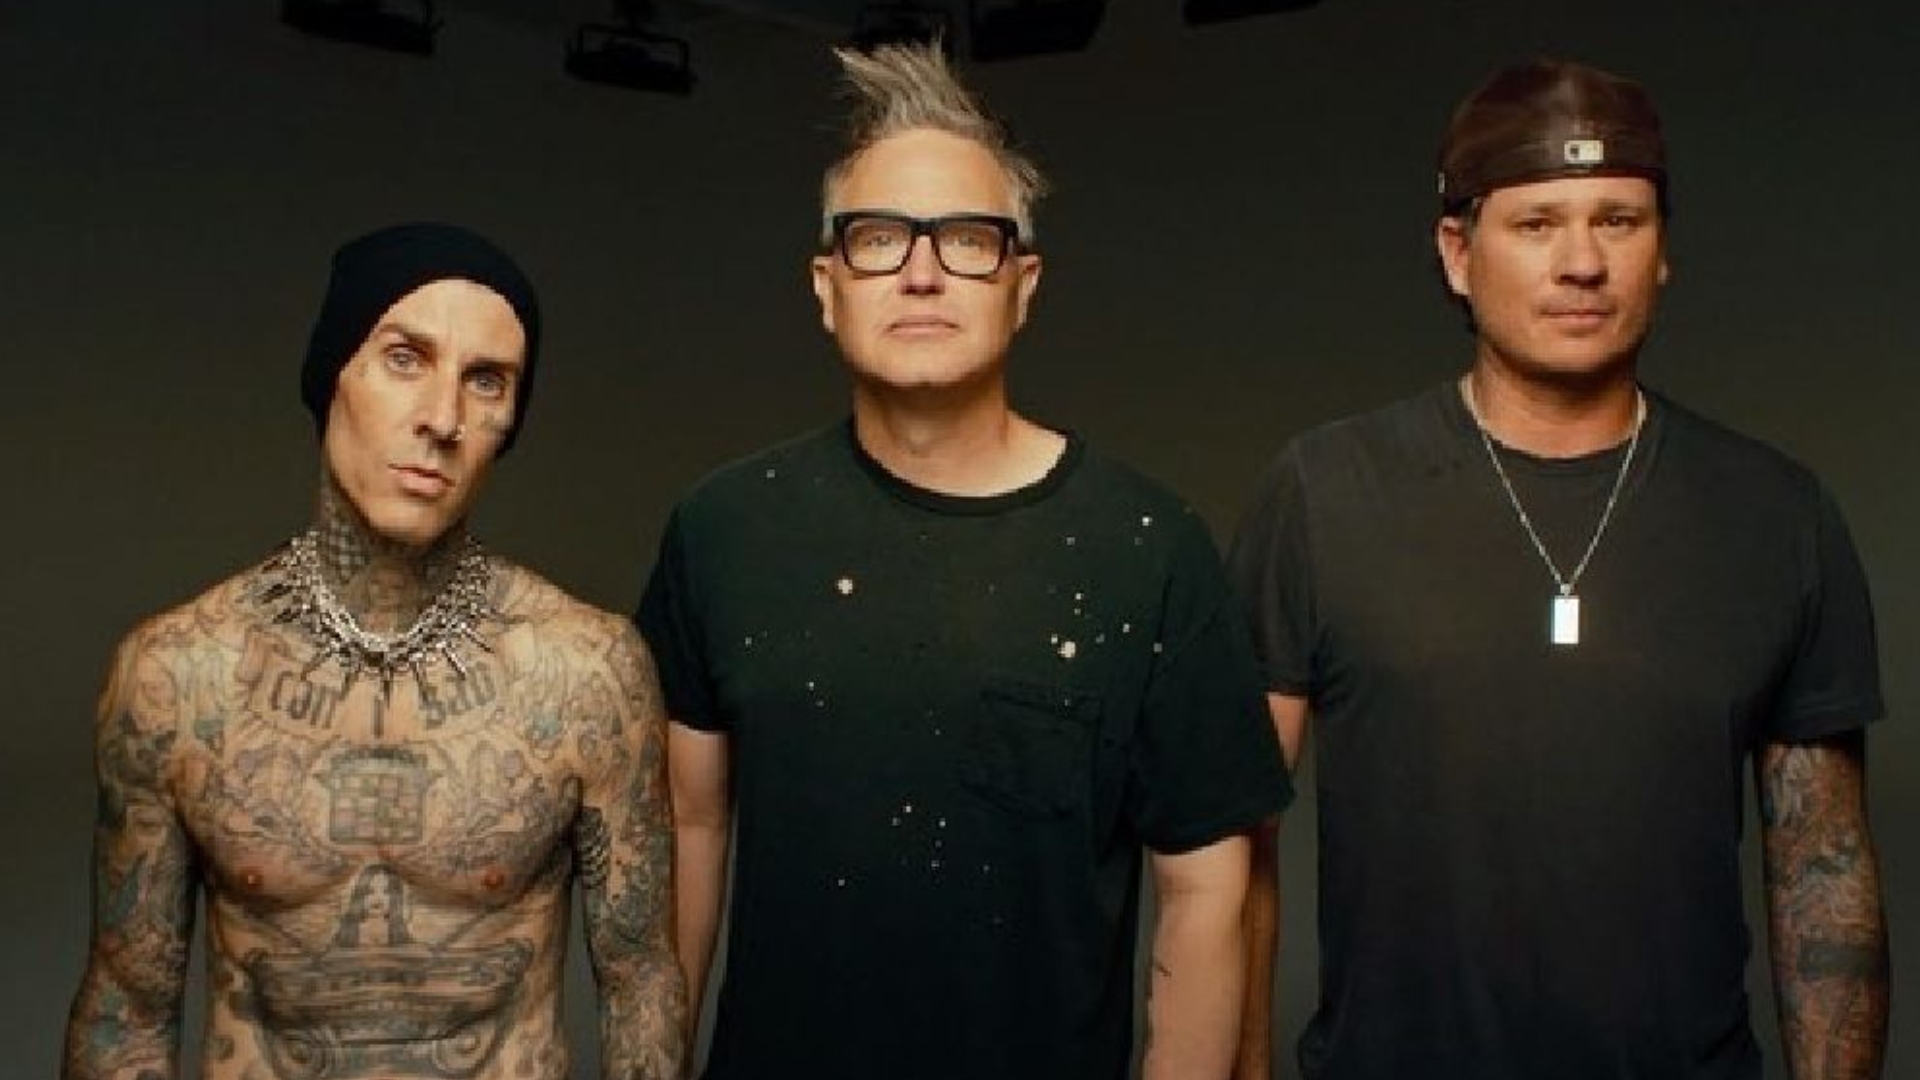 Blink182 announced the new dates of their shows in Mexico Paudal